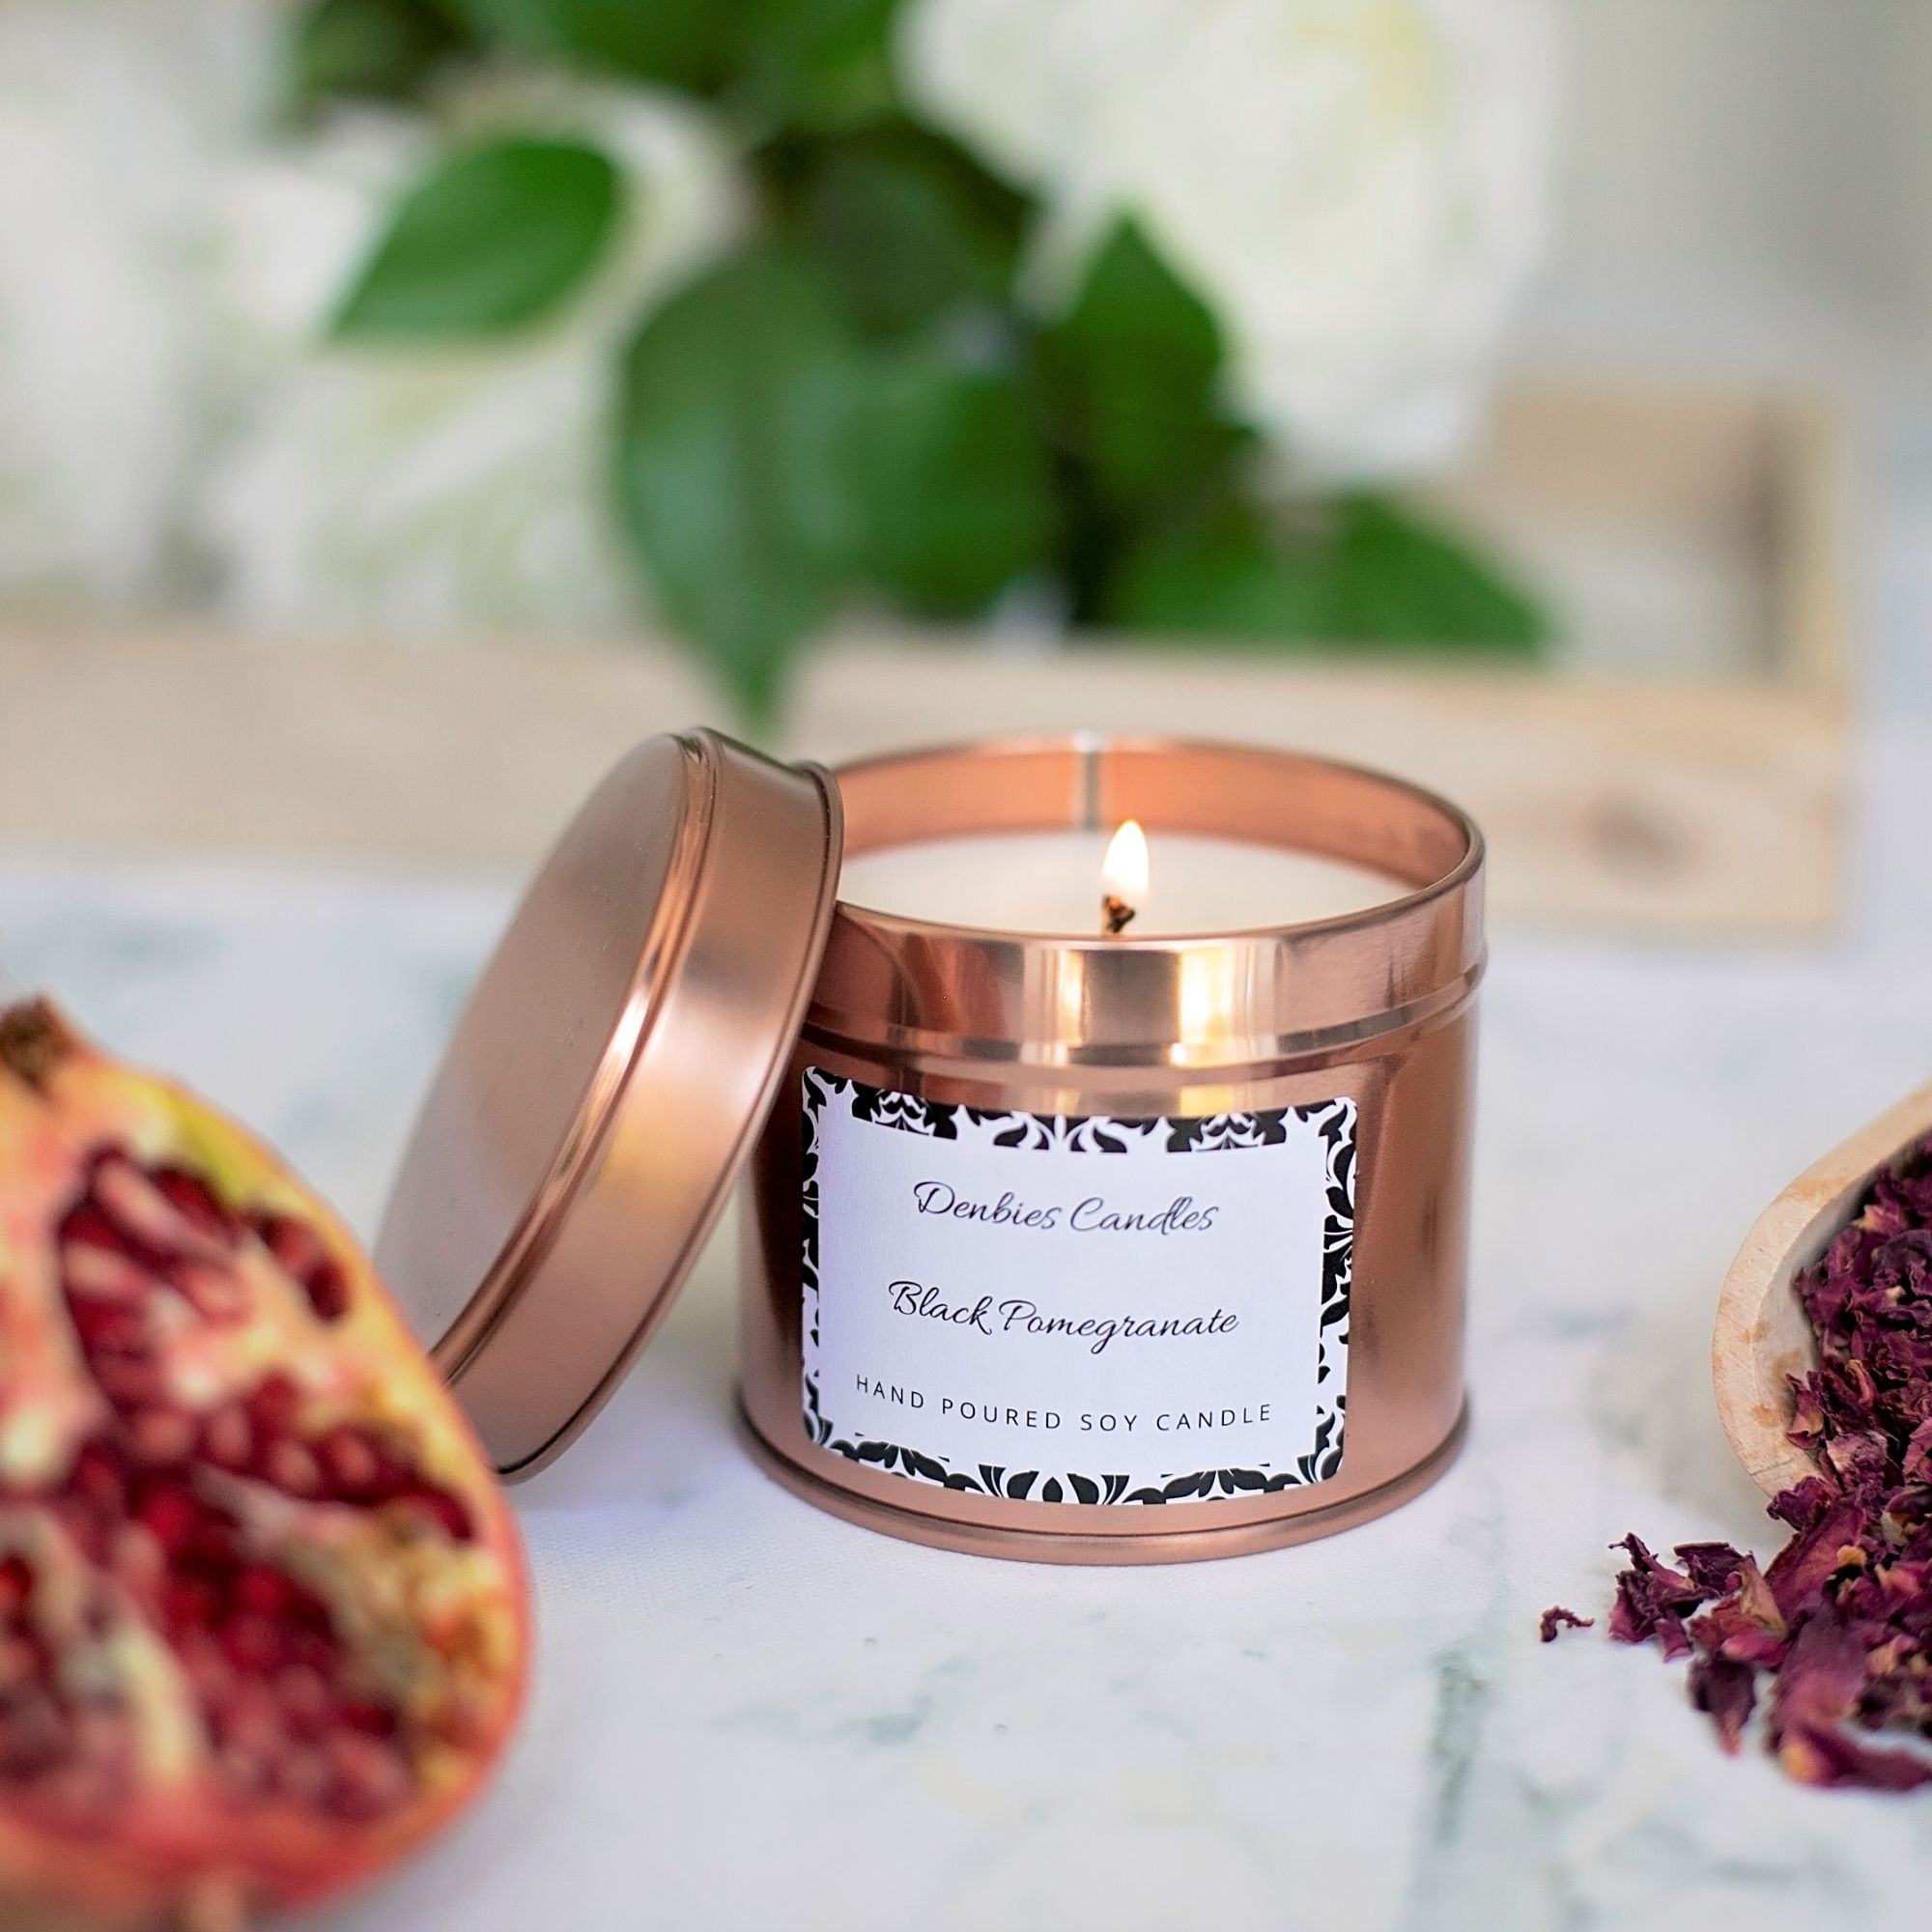 Black Pomegranate soy candle